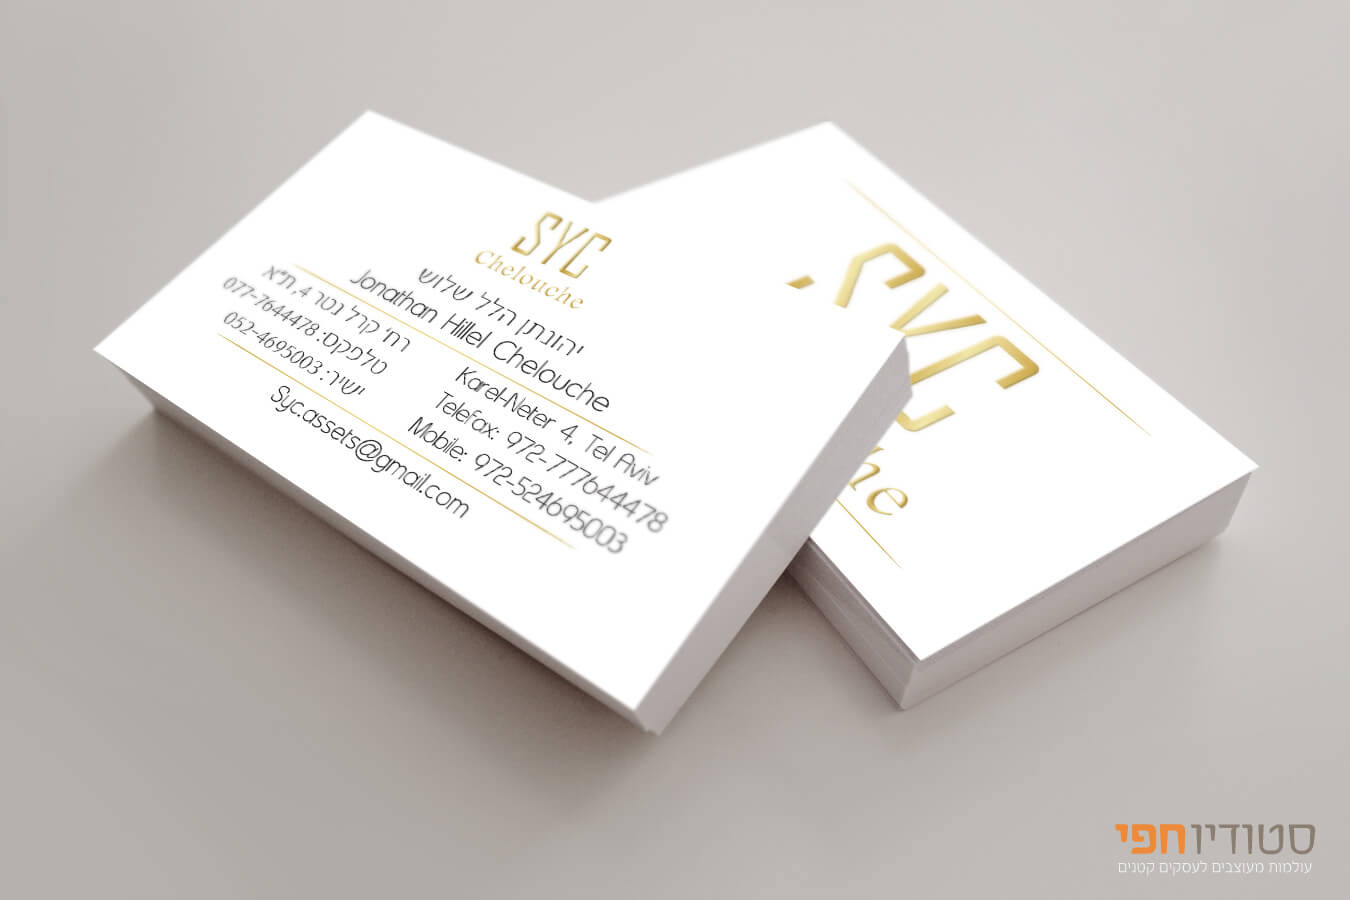 syc chelouche bussiness card